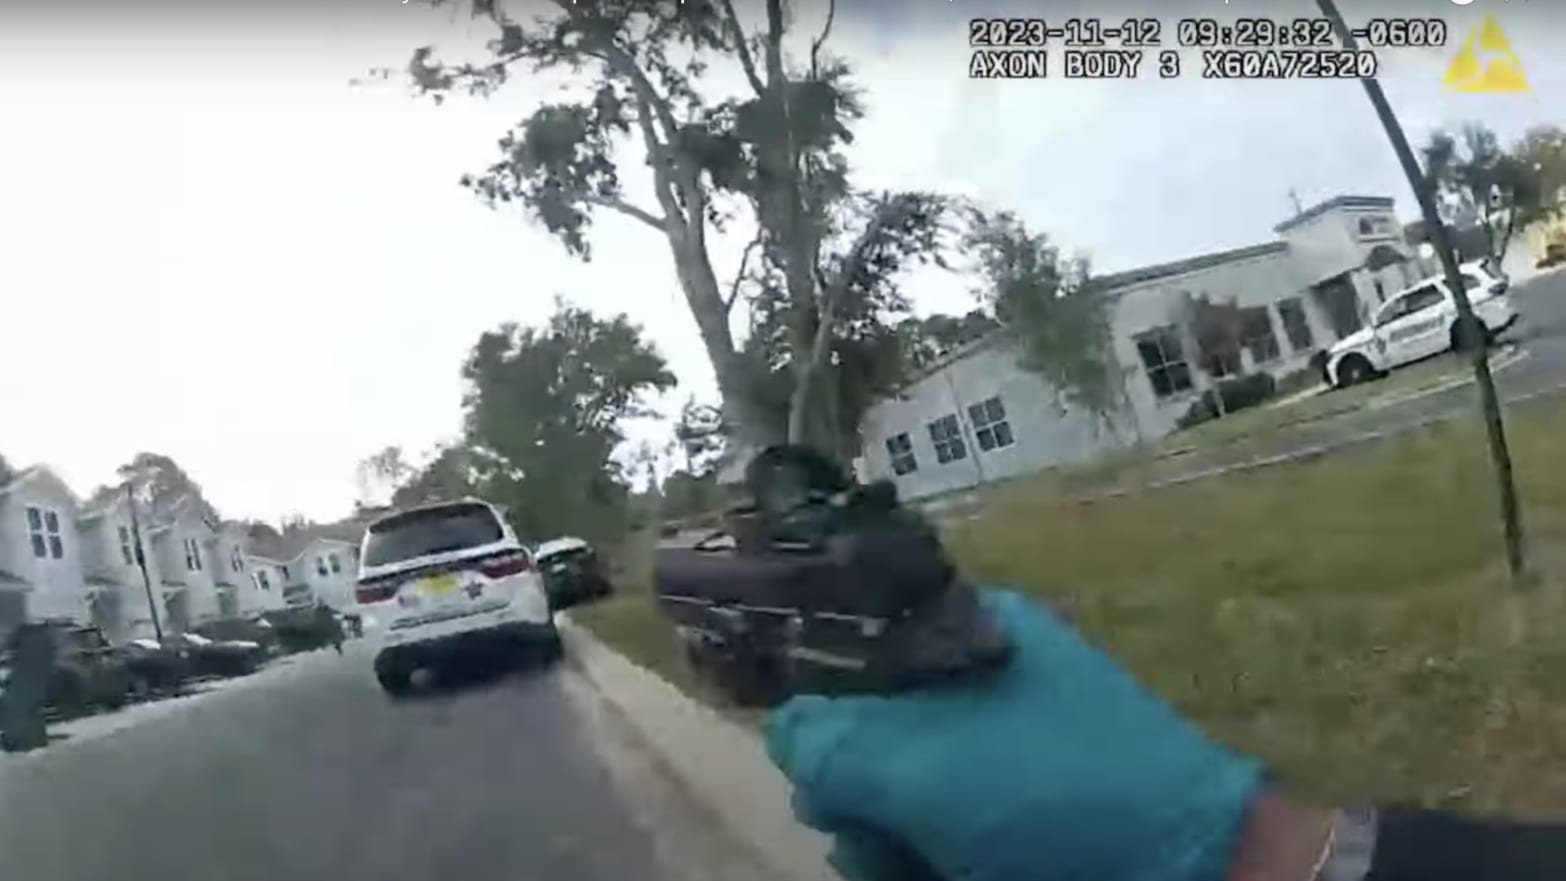 Screengrab from body-camera footage showing an officer with his gun drawn in the direction of his patrol vehicle.